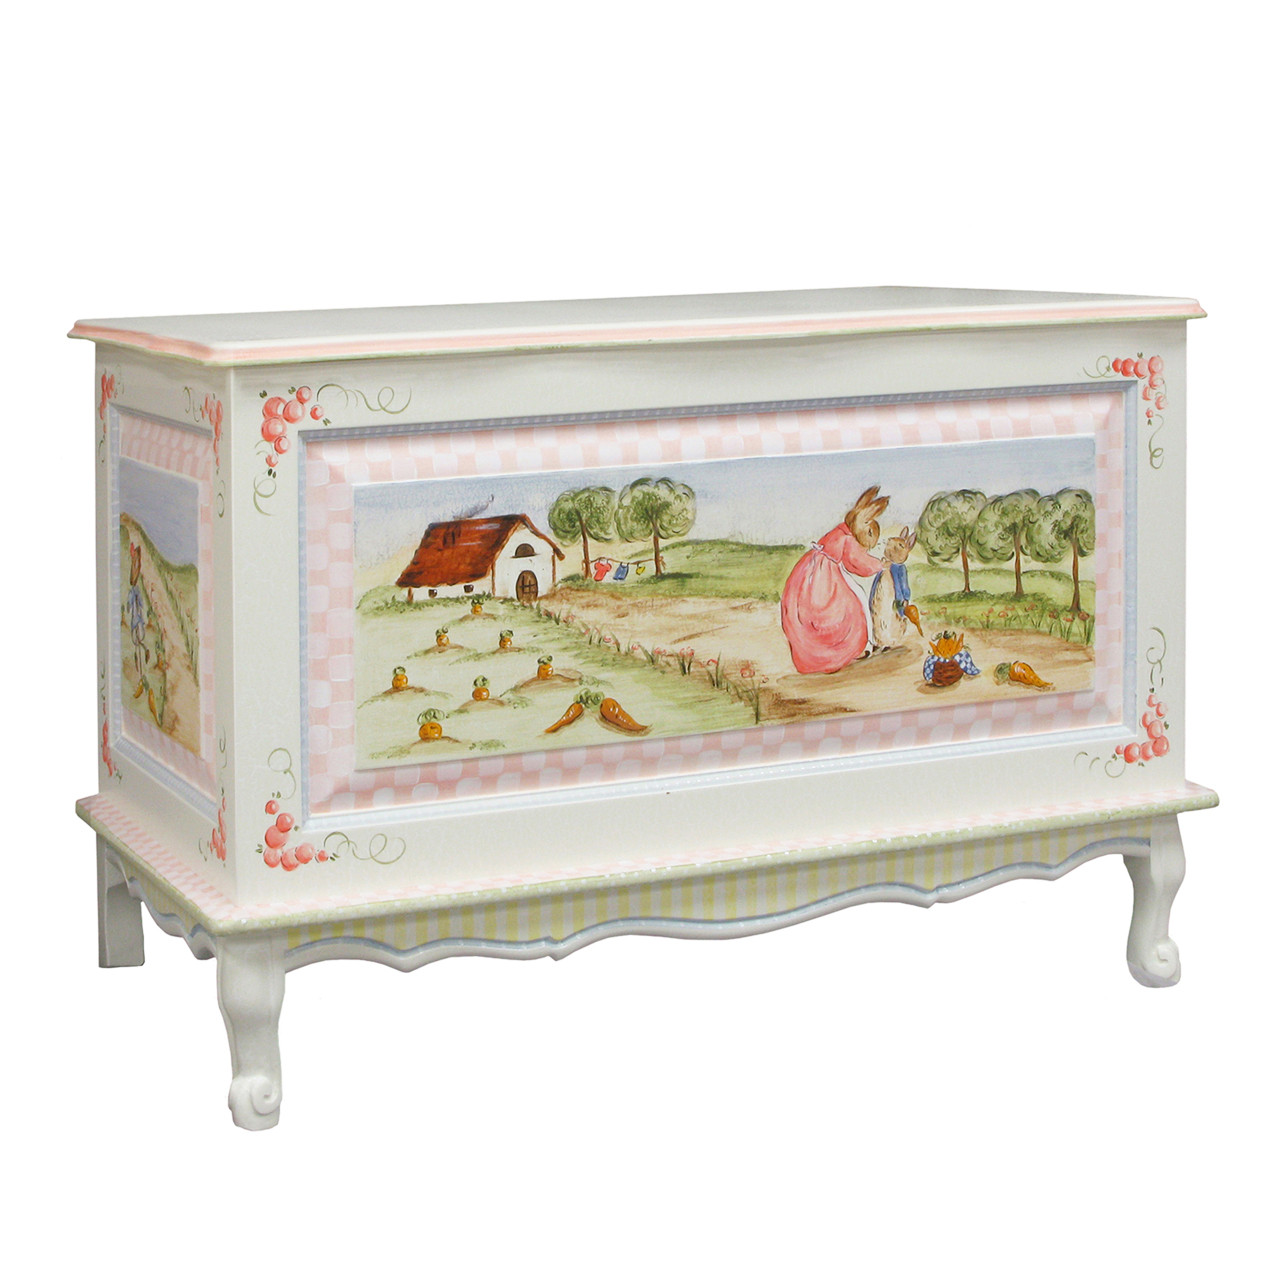 French Toy Chest in Alice in Wonderland by AFK Art For Kids